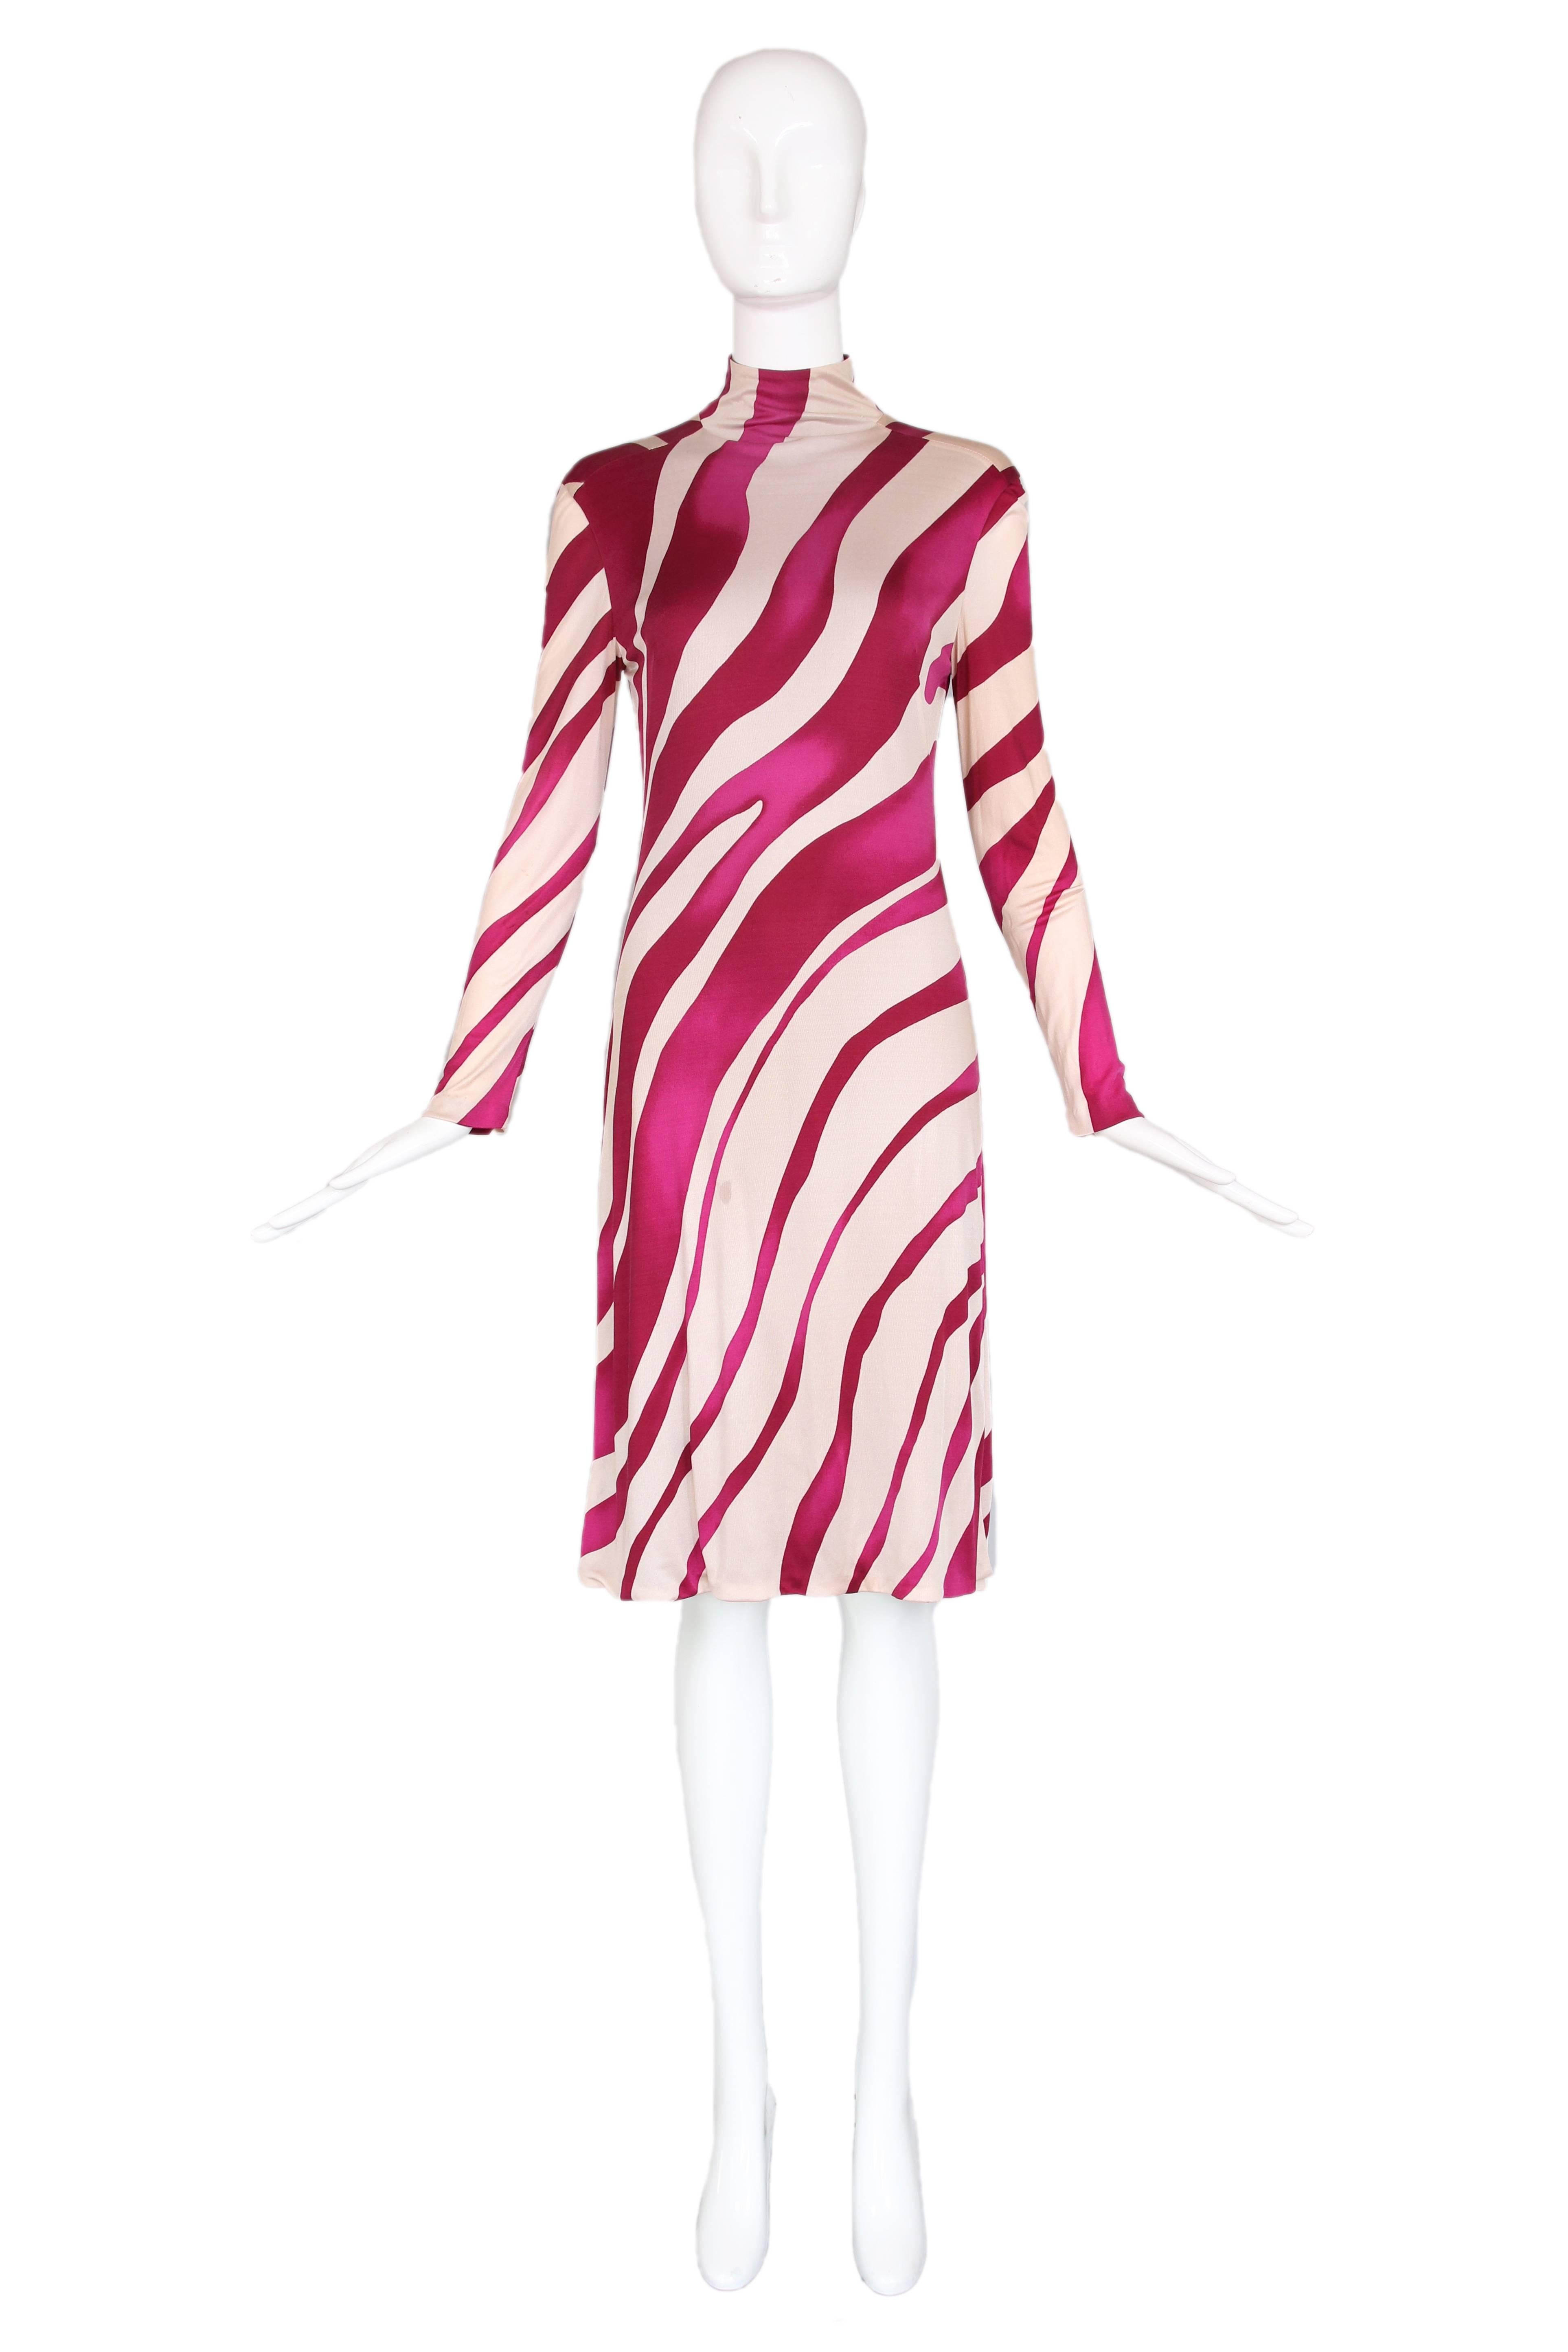 Versace Couture silk blend magenta tiger stripe print long sleeved mock turtle neck Medusa dress. Zip up back with medusa buttons at back neck. In excellent condition with a few tiny abrasions to  the fabric. Size IT 40, US 6. 
MEASUREMENTS:
Bust